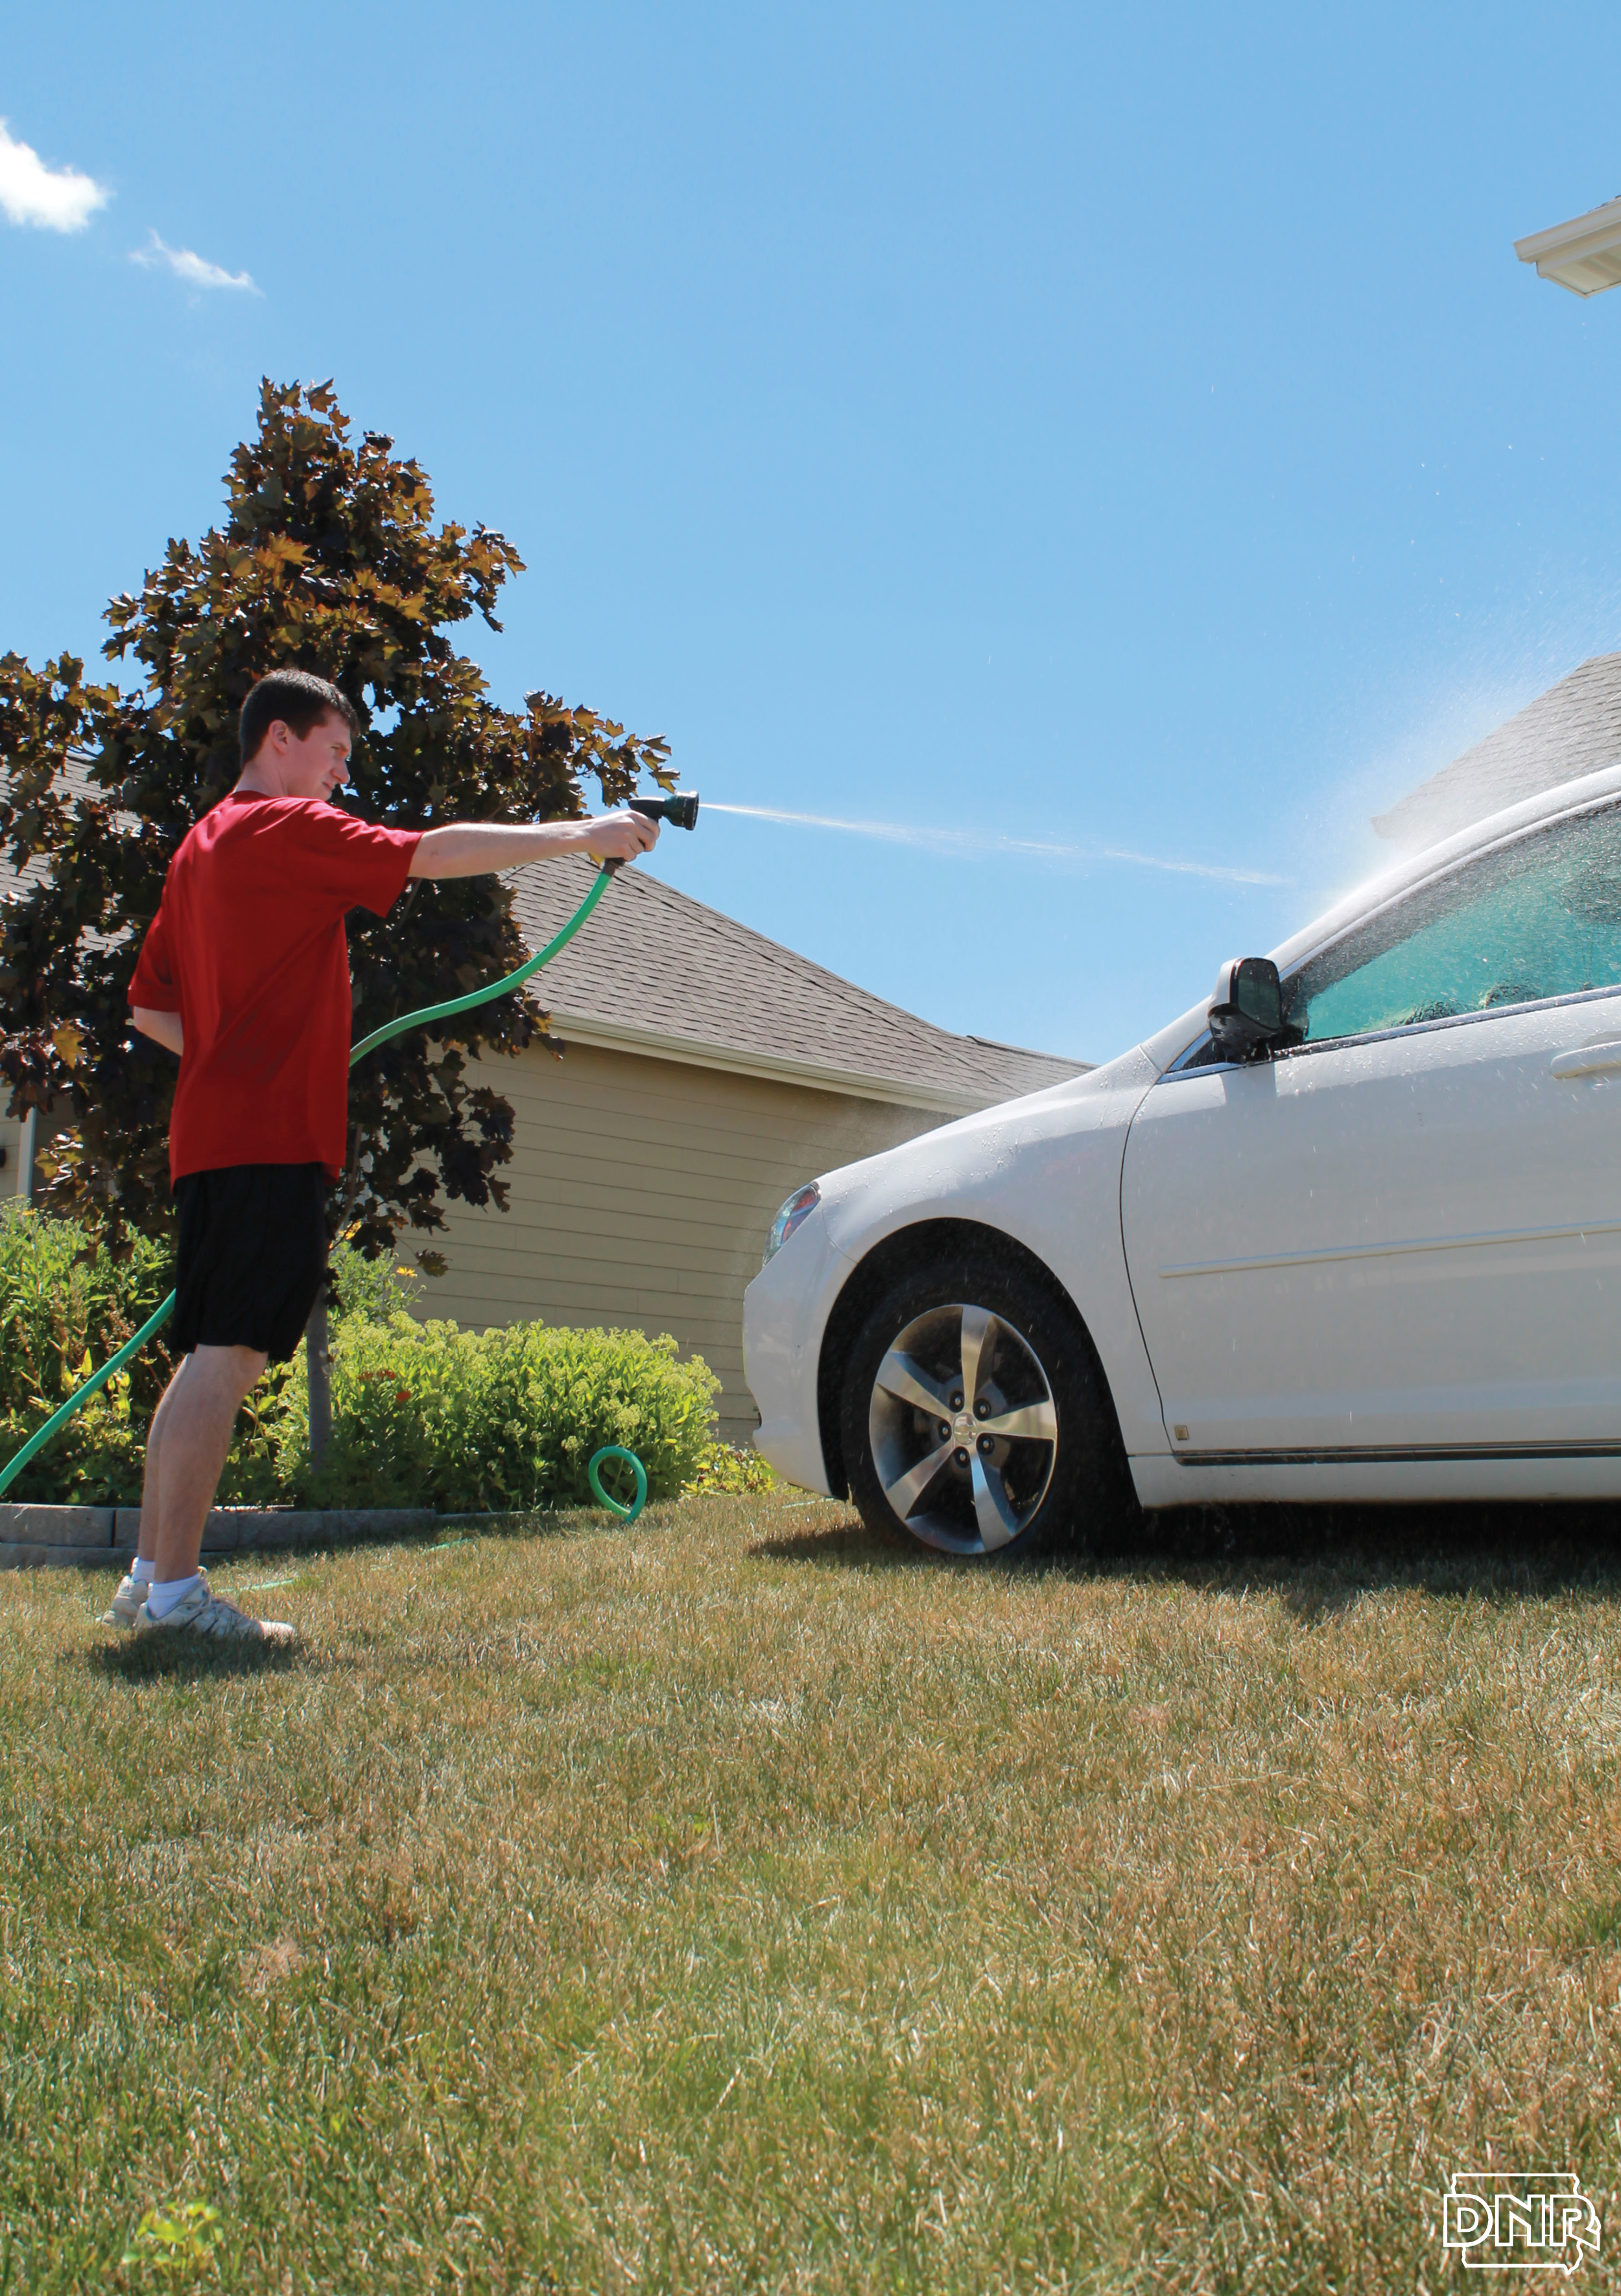 If you wash your car at home, park it on the grass to keep soaps and cleaners out of the storm sewer - more tips | Iowa DNR